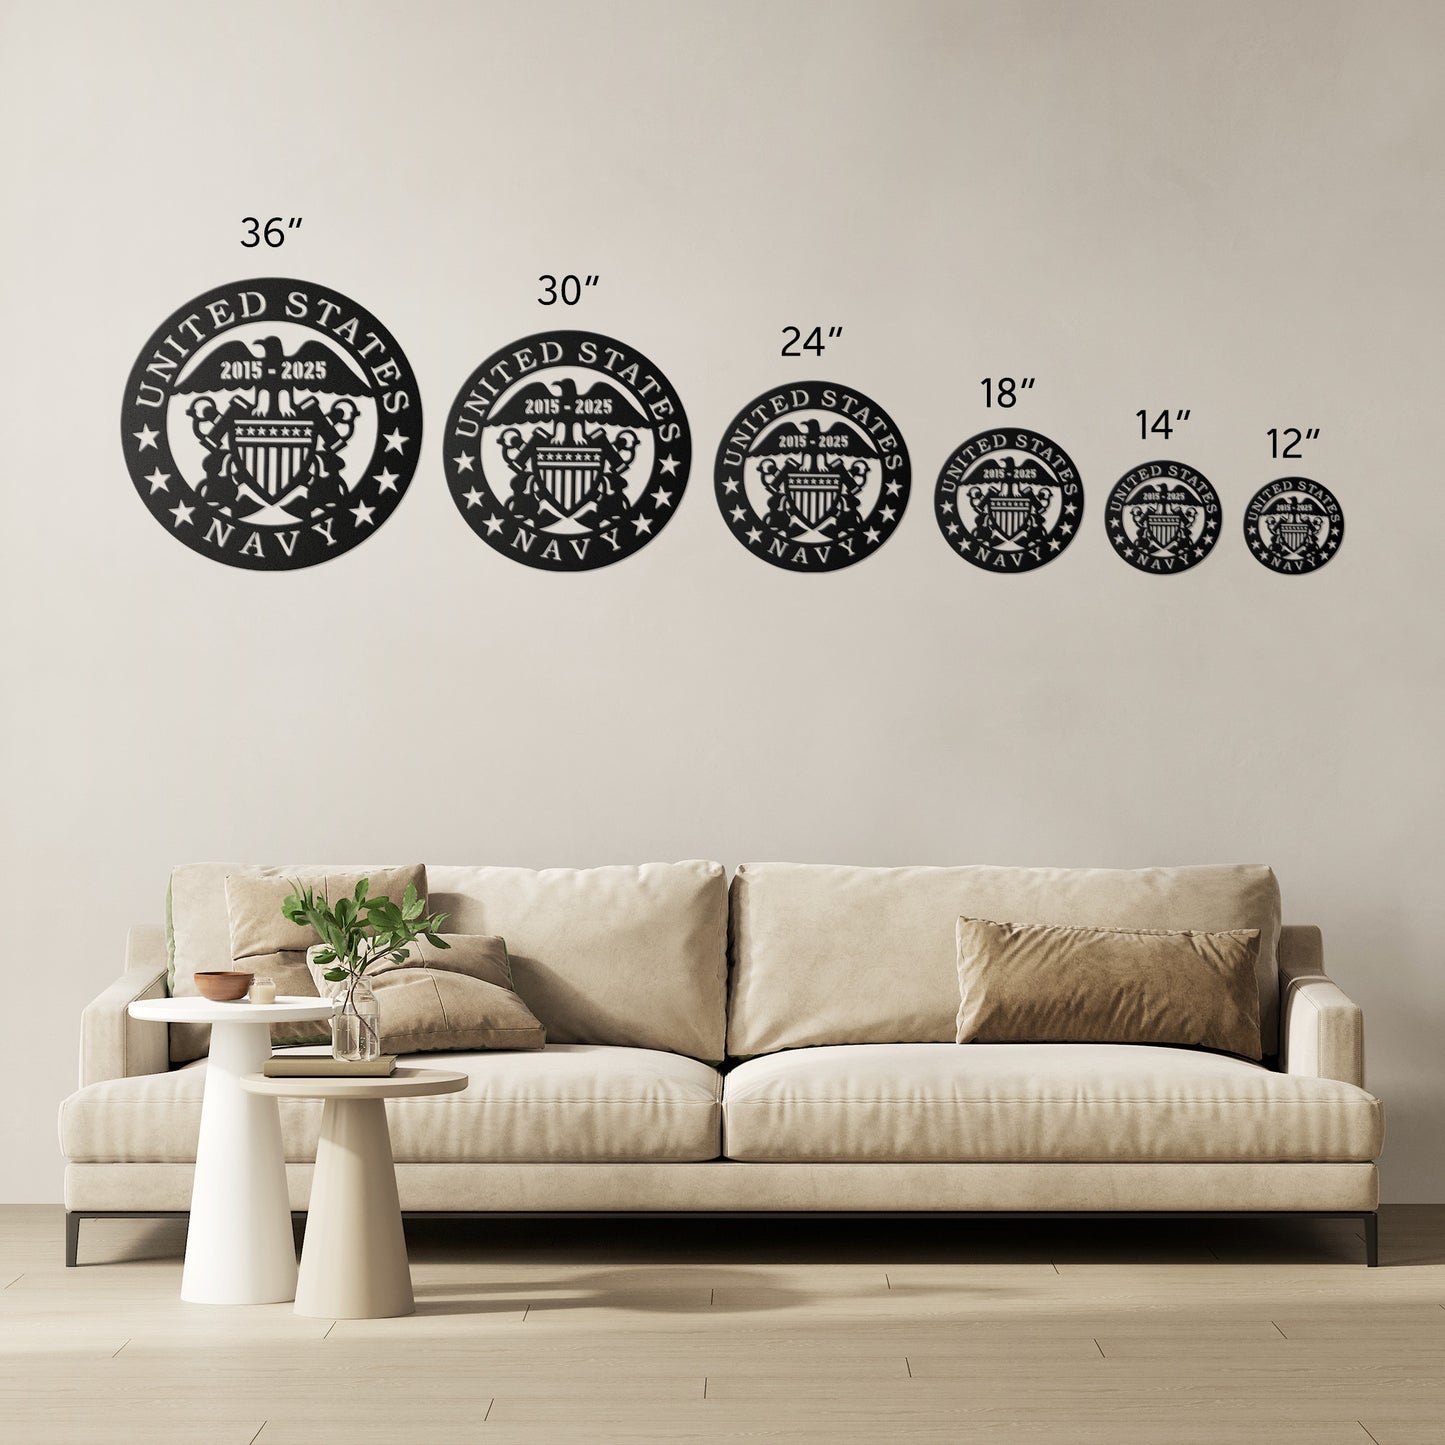 US Navy Personalized Date Metal Wall Art Circle